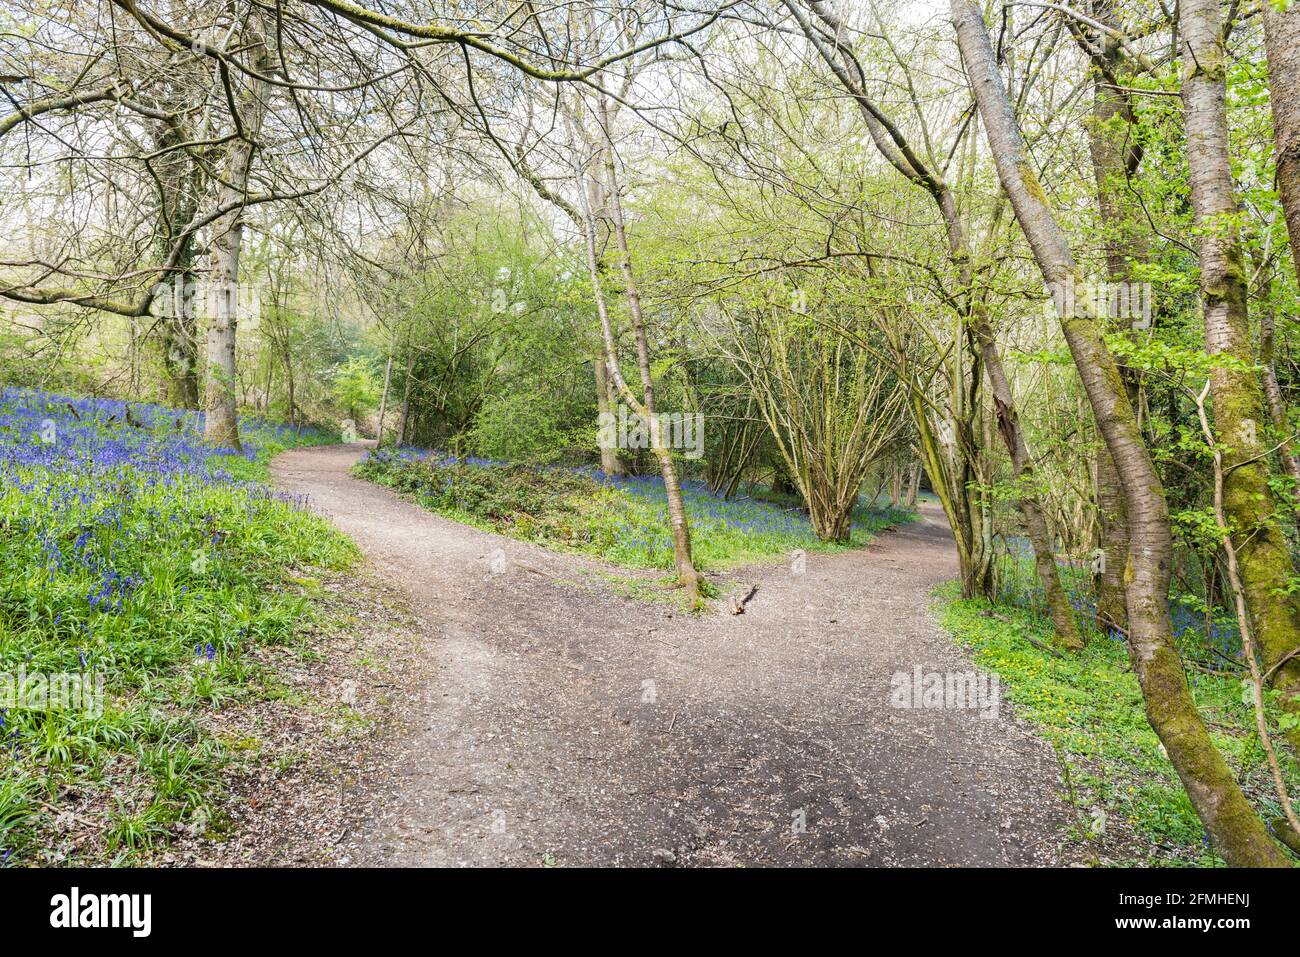 Wild Hyacinth / English bluebell colonies in woodlands Stock Photo